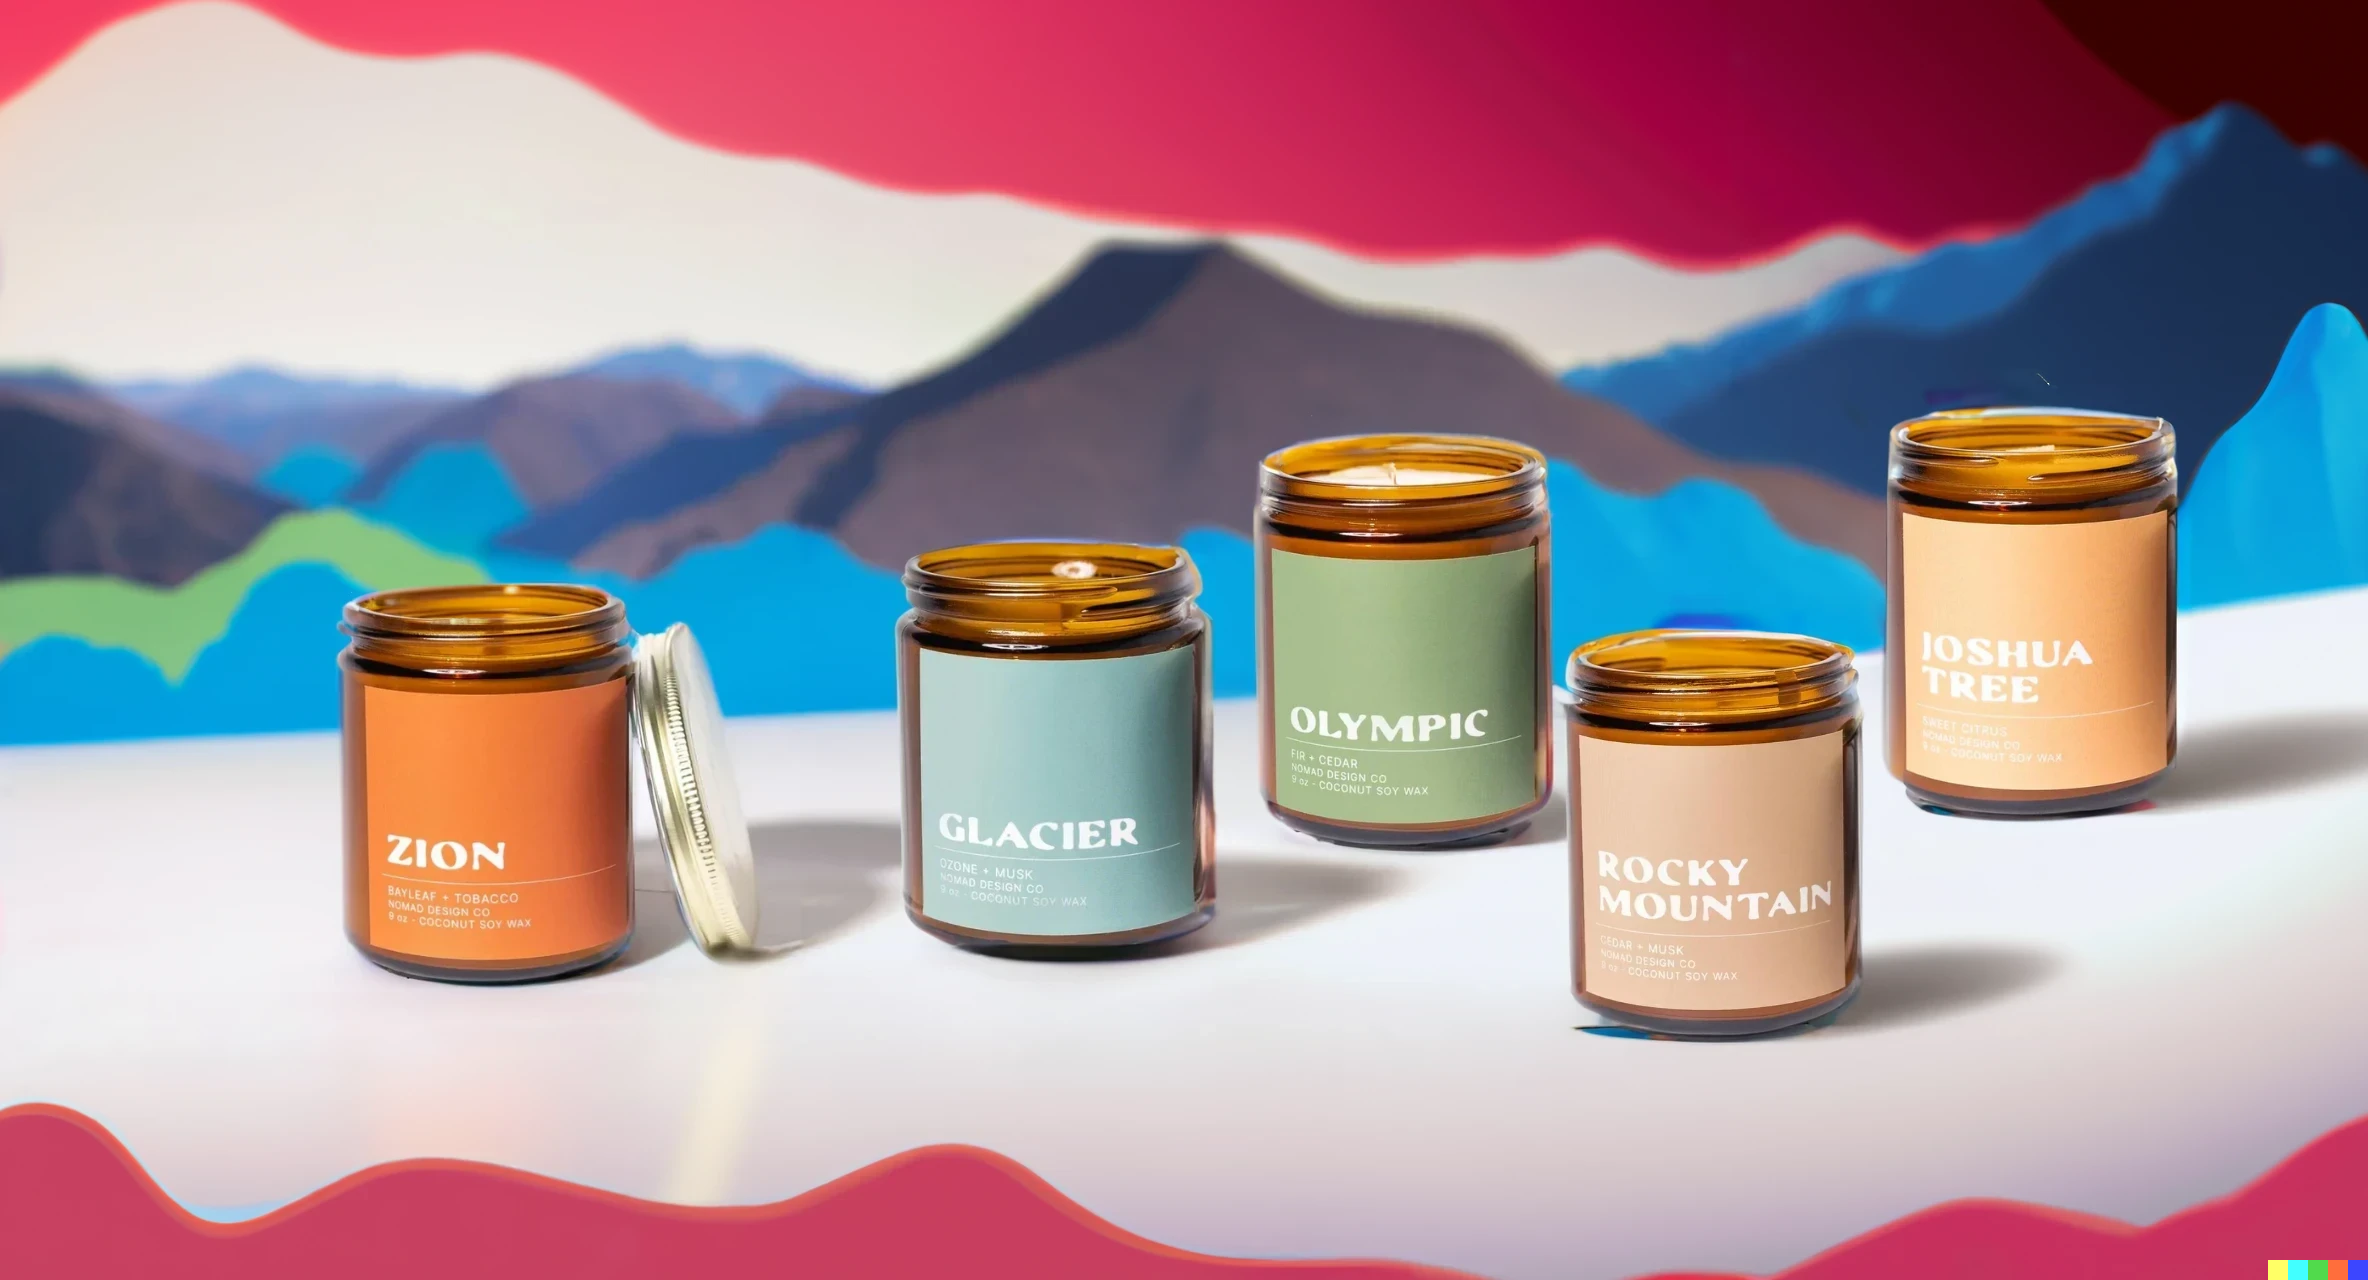 A collection of national park candles, showing Zion, Glacier, Olympic, Rocky Mountain, and Joshua Tree National Park candles together on a table.